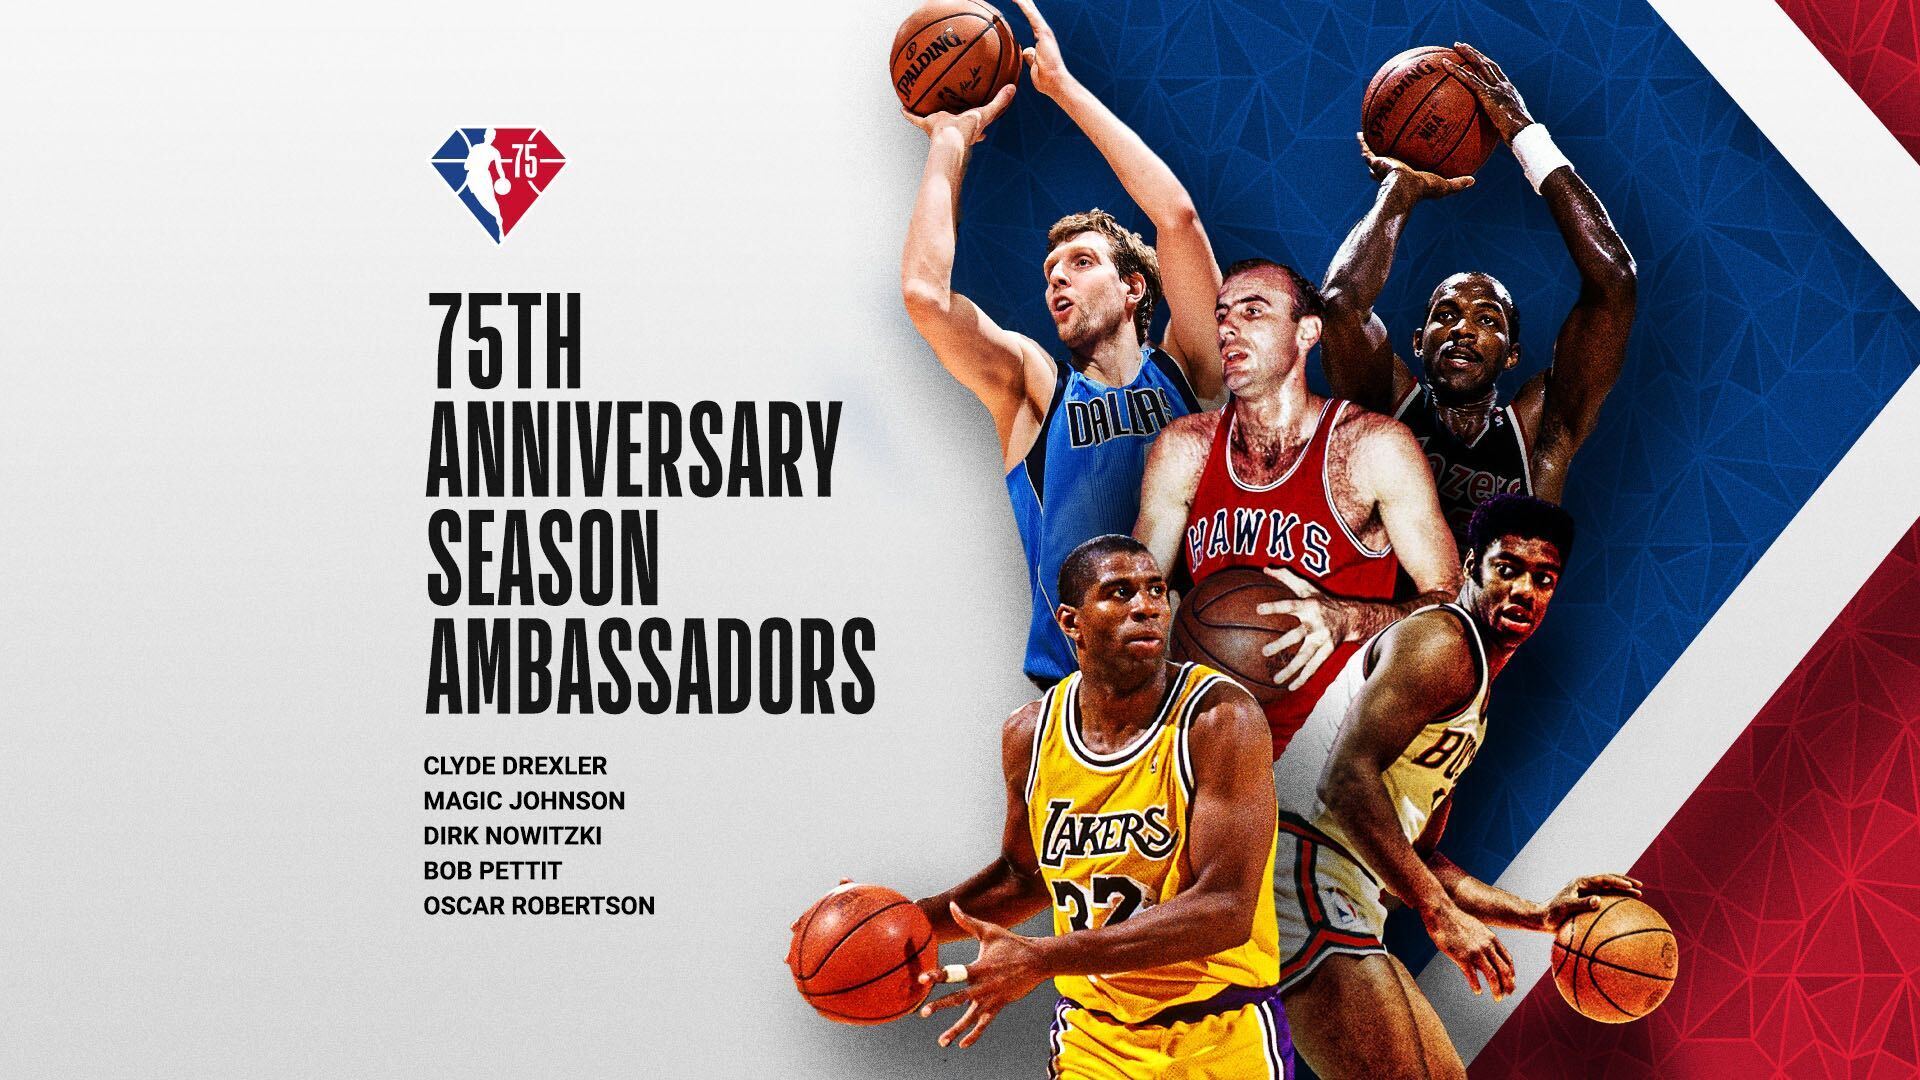 NBA to unveil 75th Anniversary Team during season's opening week